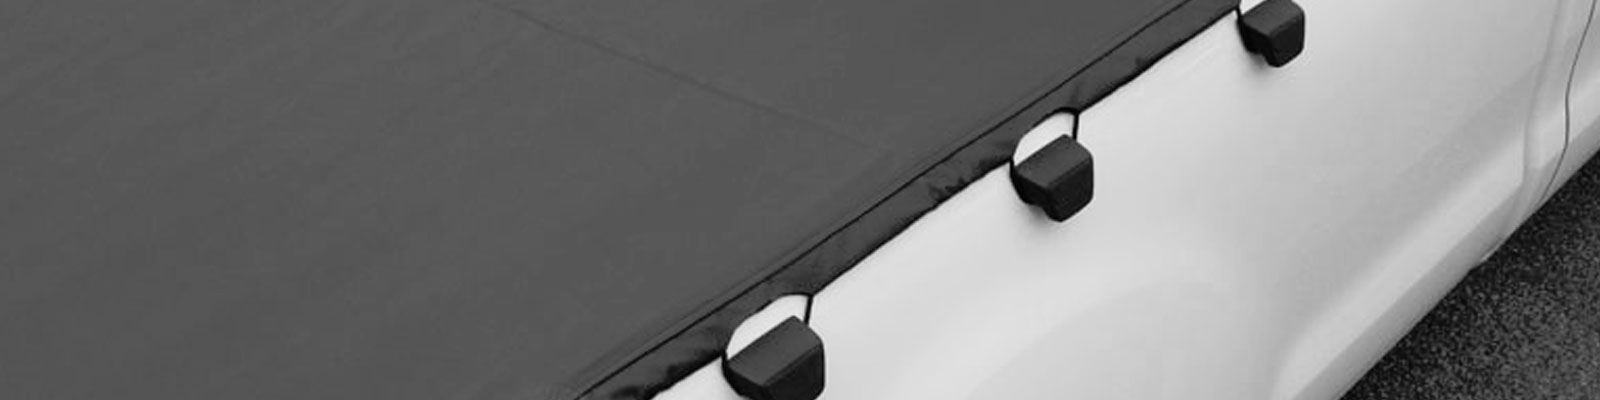 Hooked Body Tonneau Covers